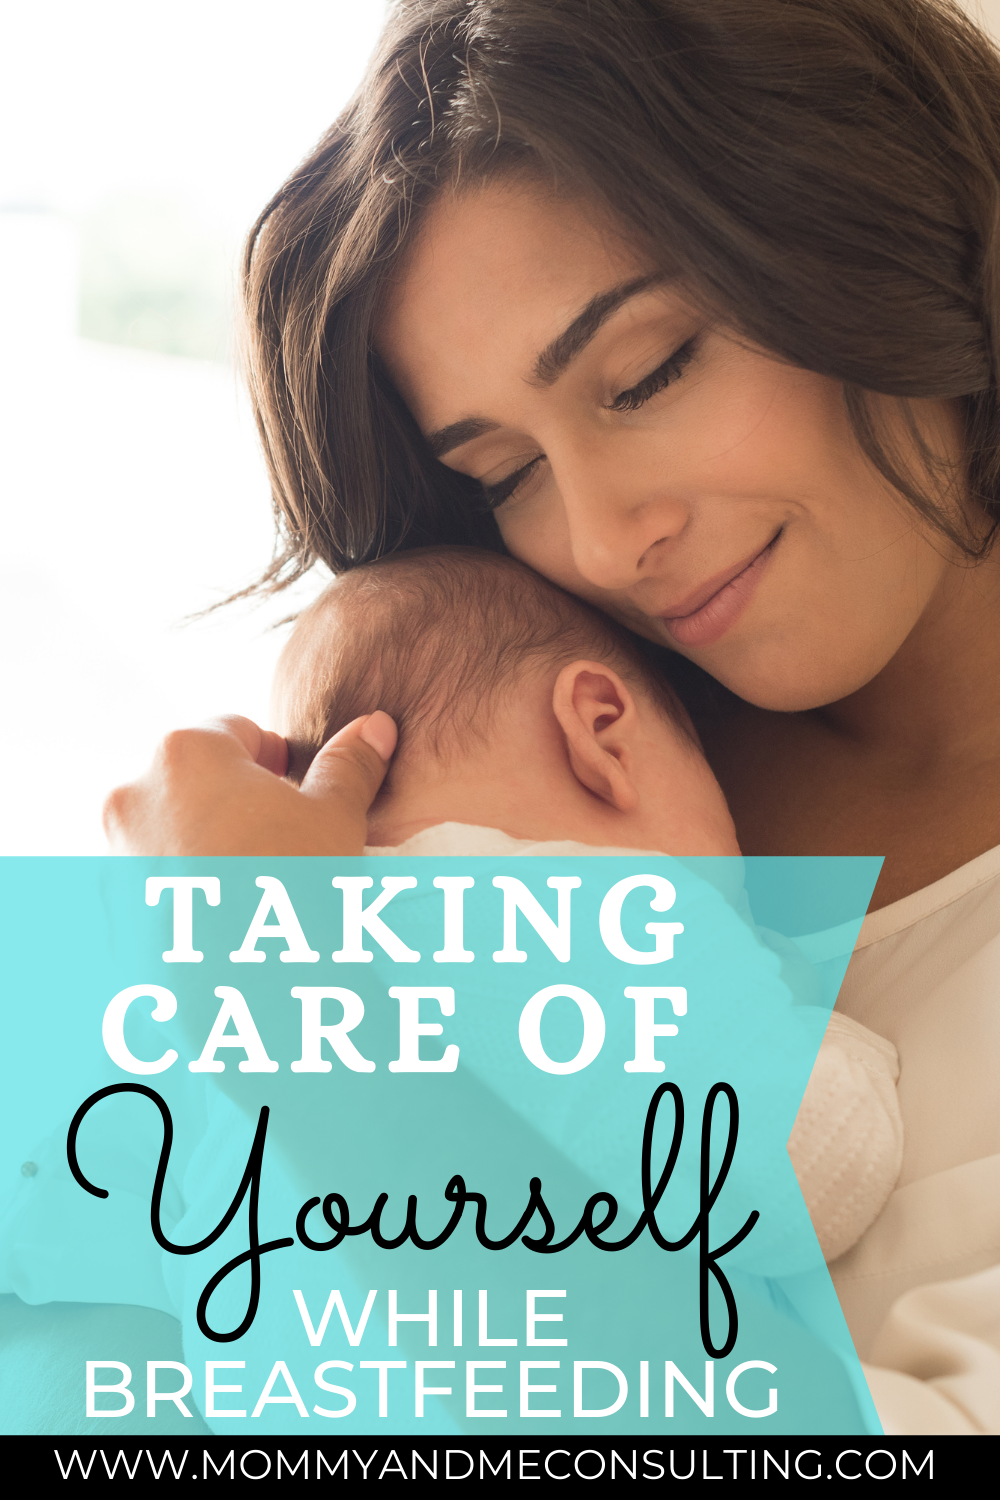 Taking Care of yourself while breastfeeding